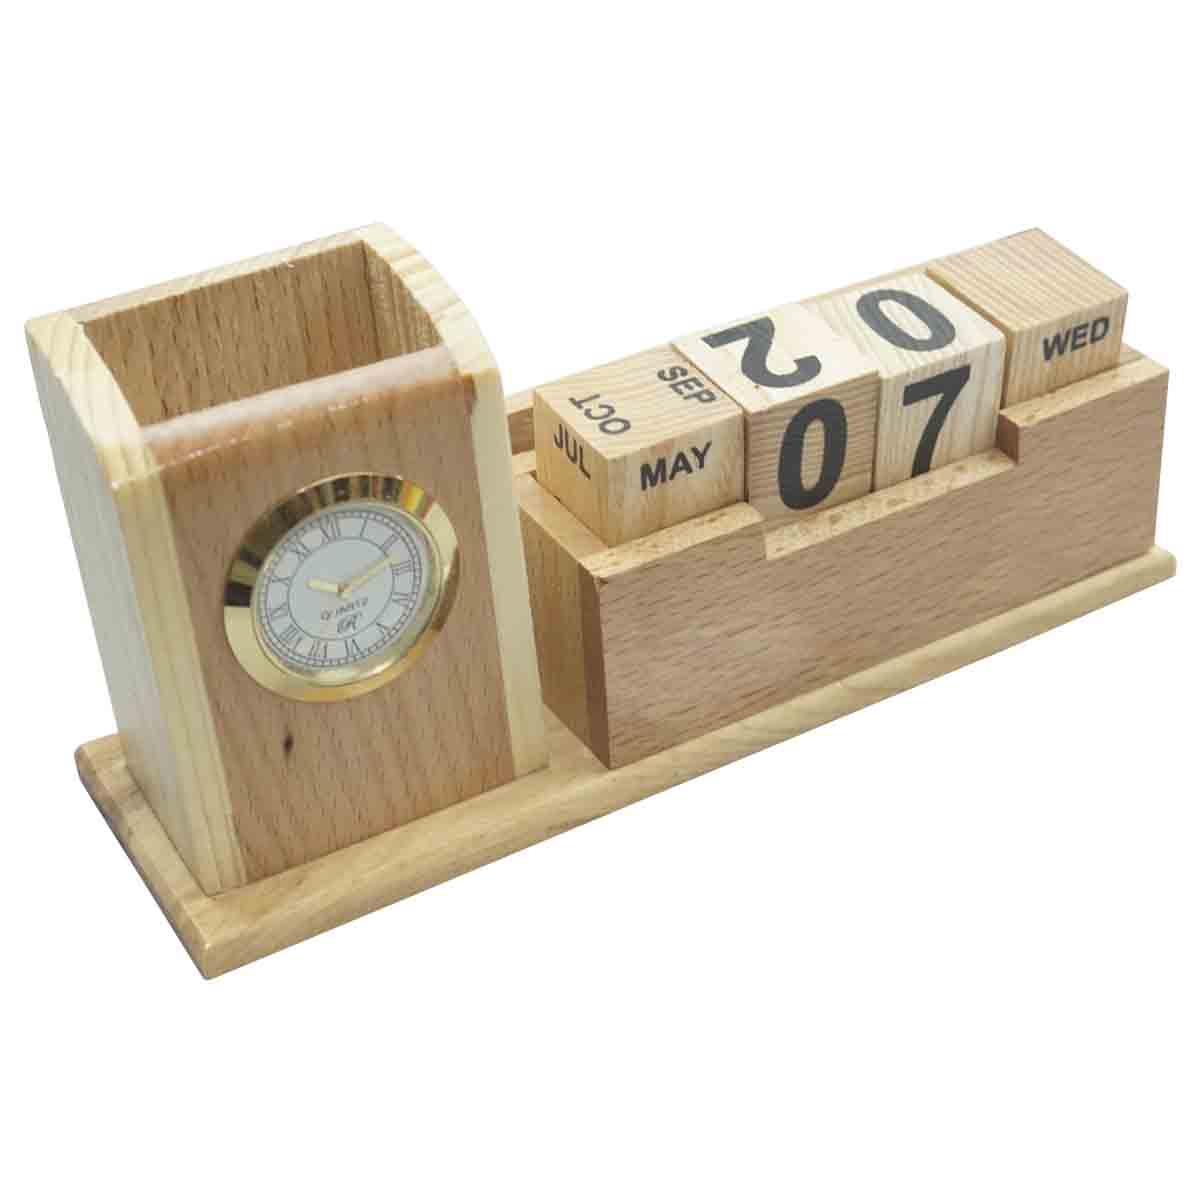 penhouse.in Card Holder pen holder and Calender Block wooden stand with customization SKU - 87137